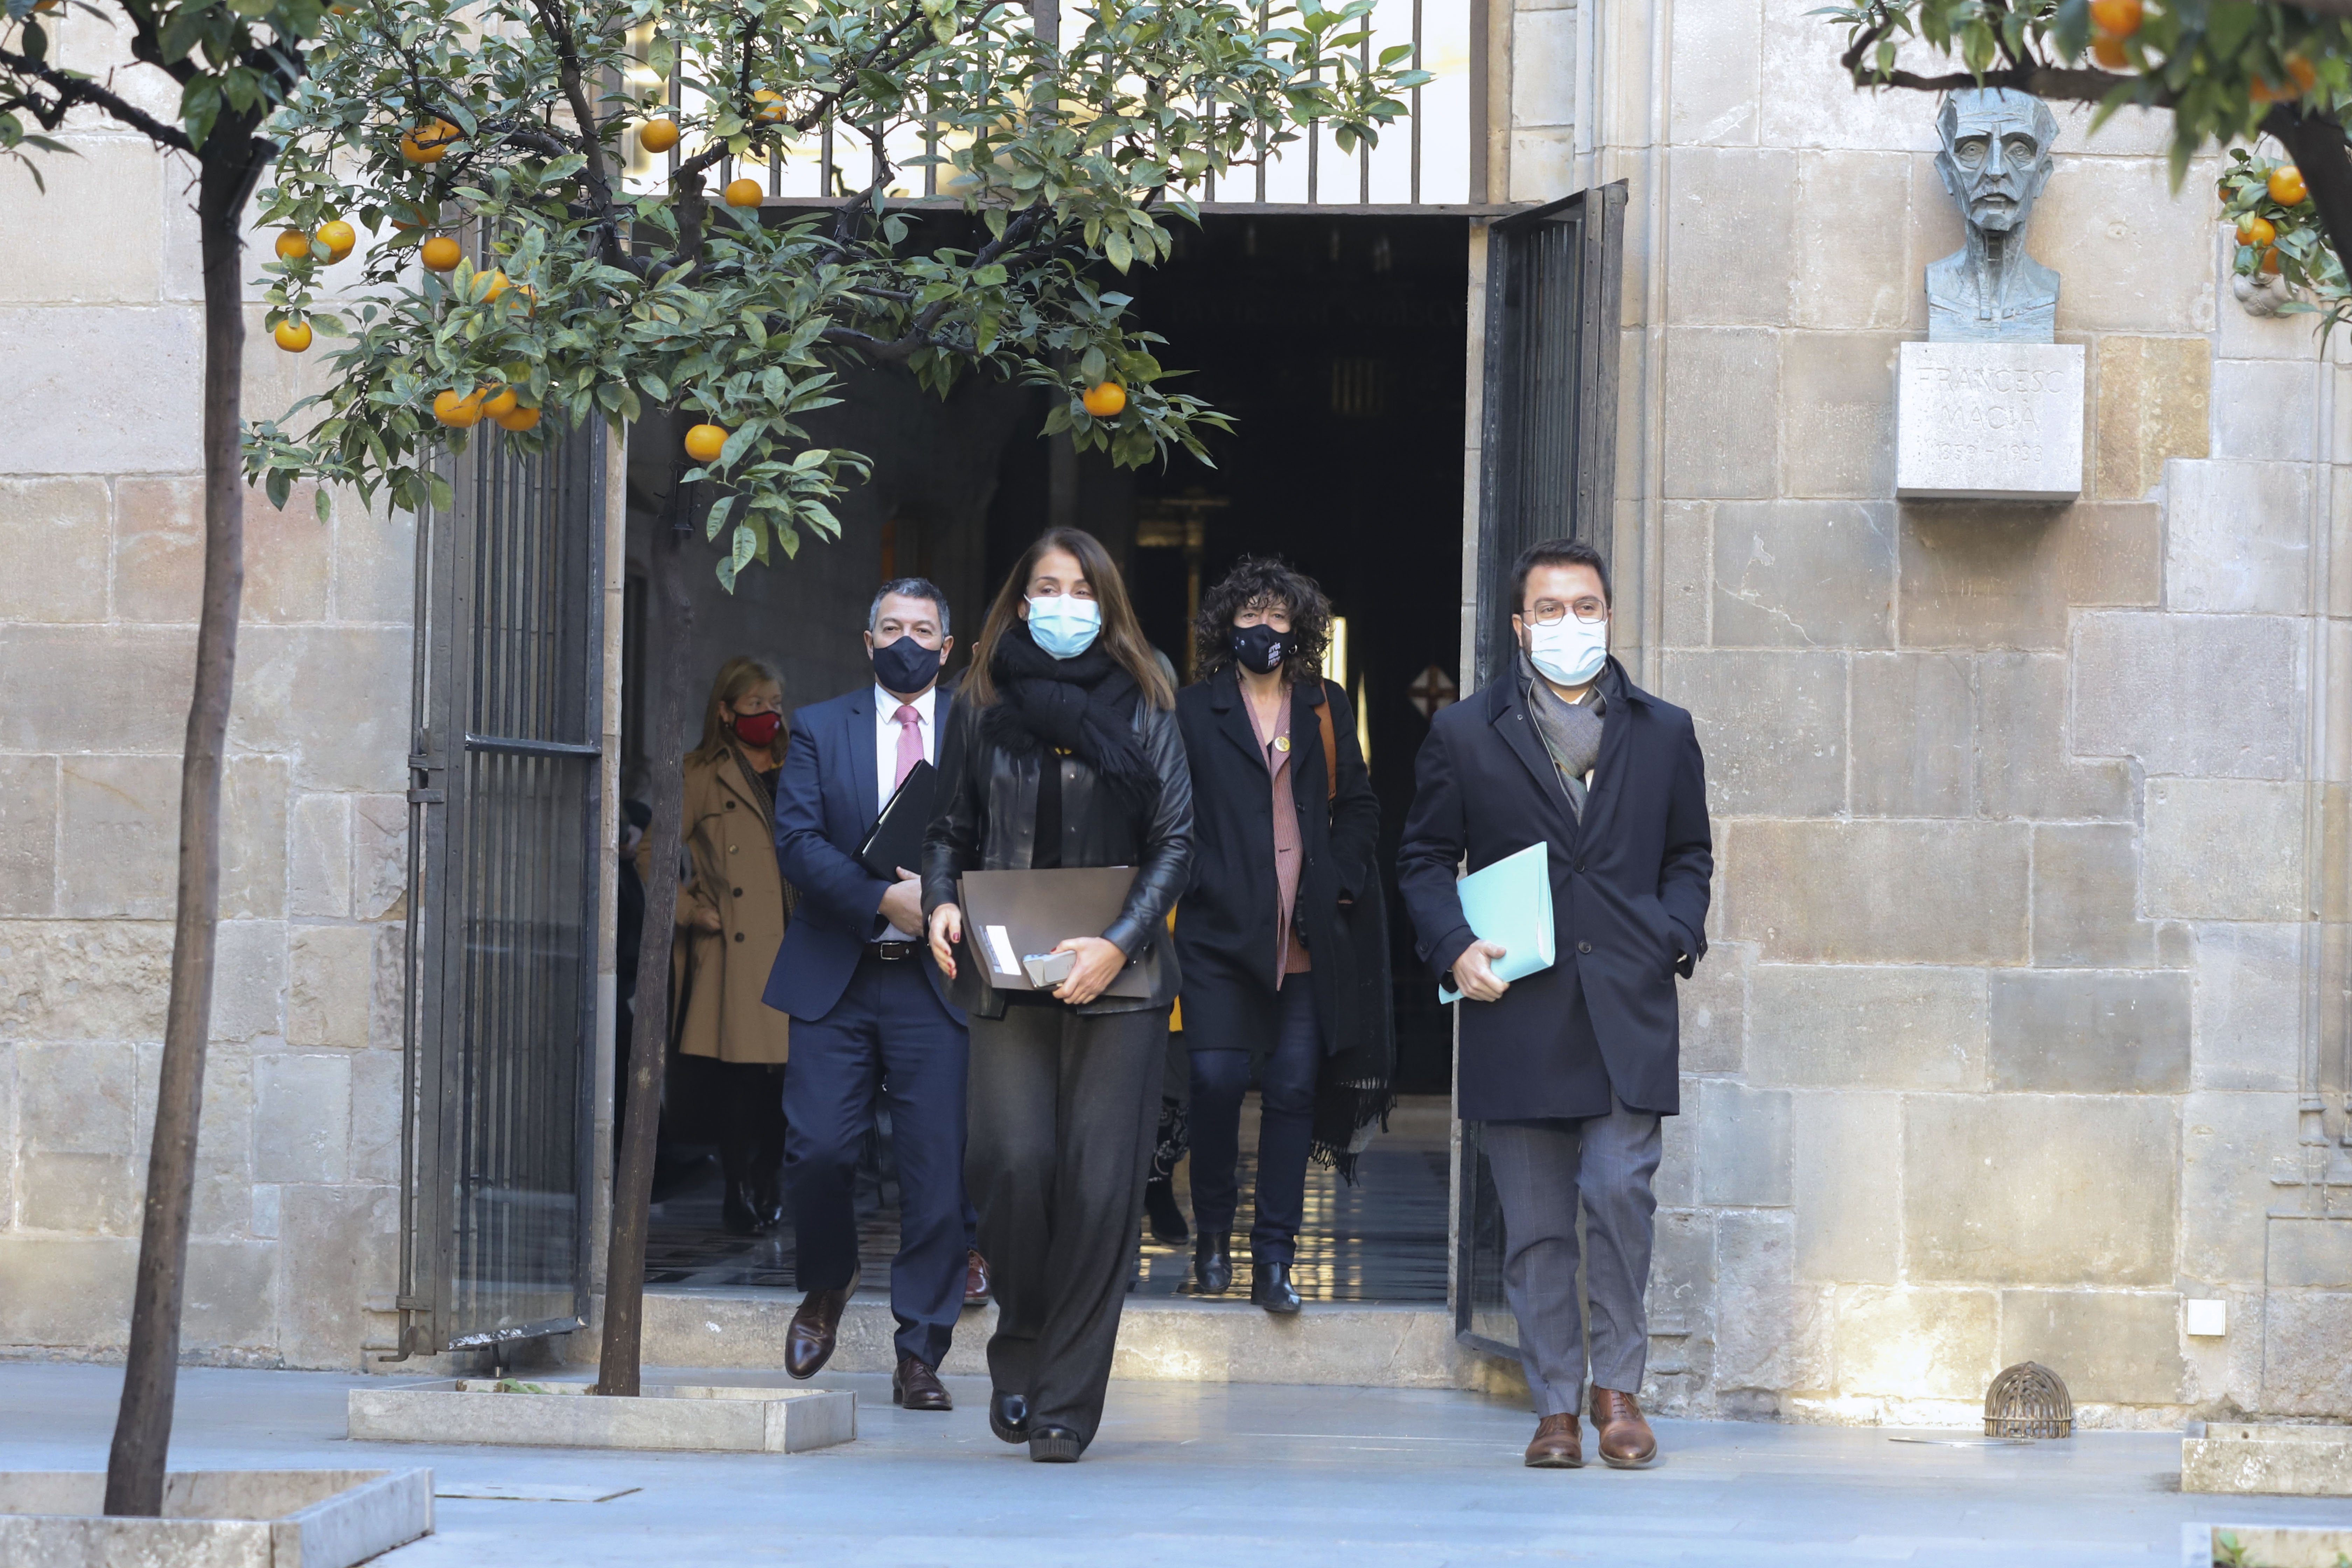 Court justifies Feb 14th election due to Catalan government's "provisionality"